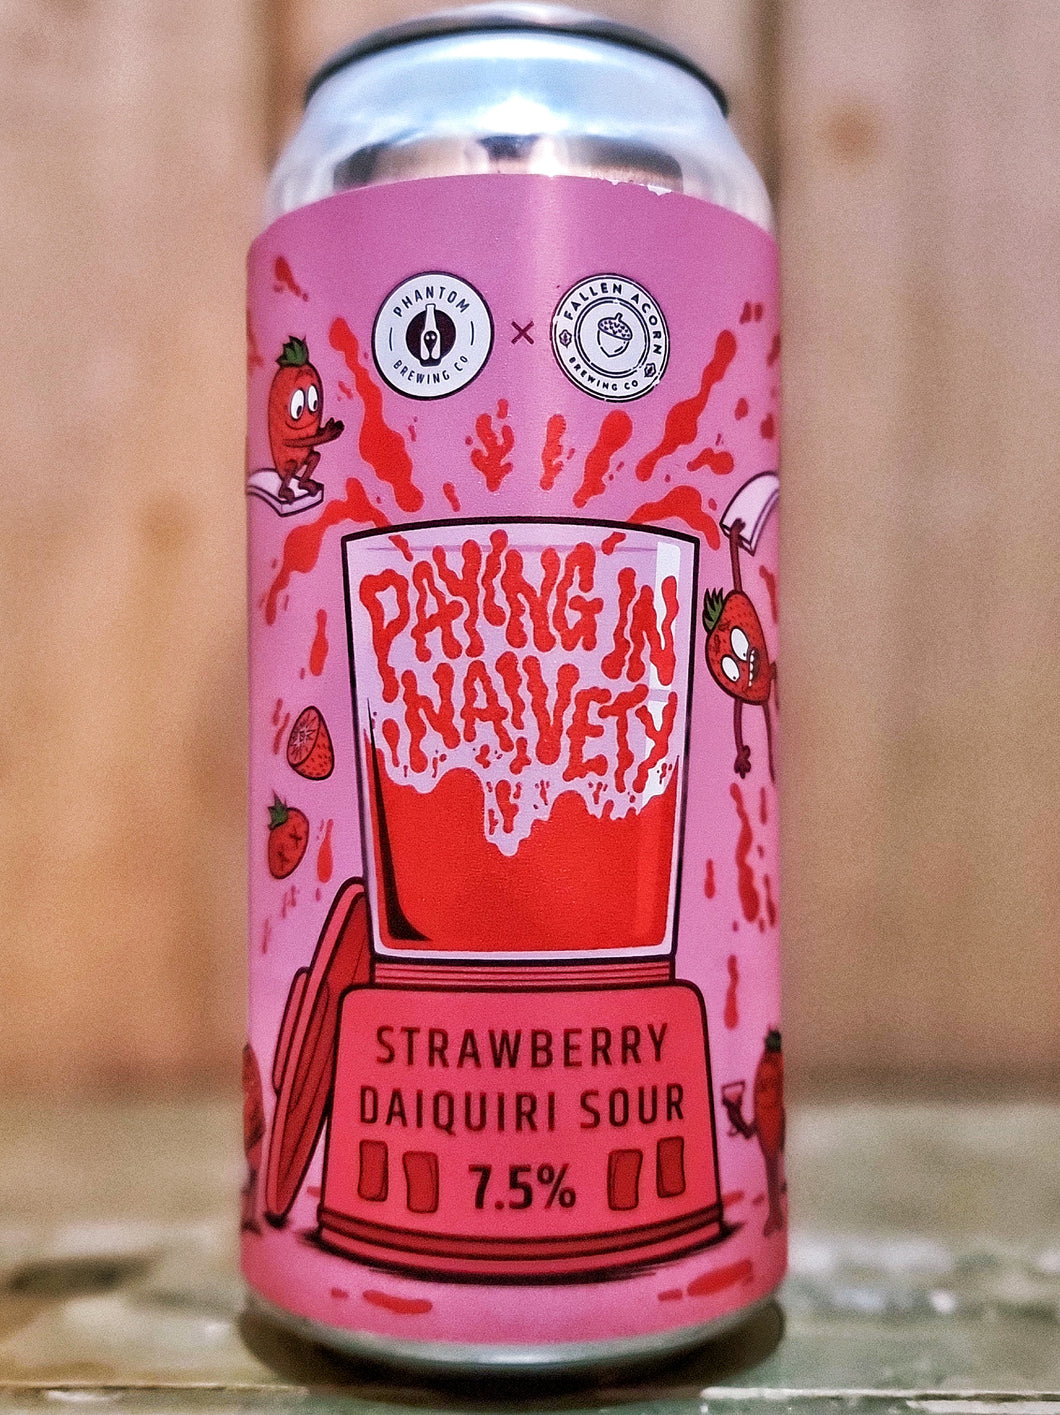 Phantom Brewing Co - Paying In Naivety (Strawberry Daiquiri Sour)